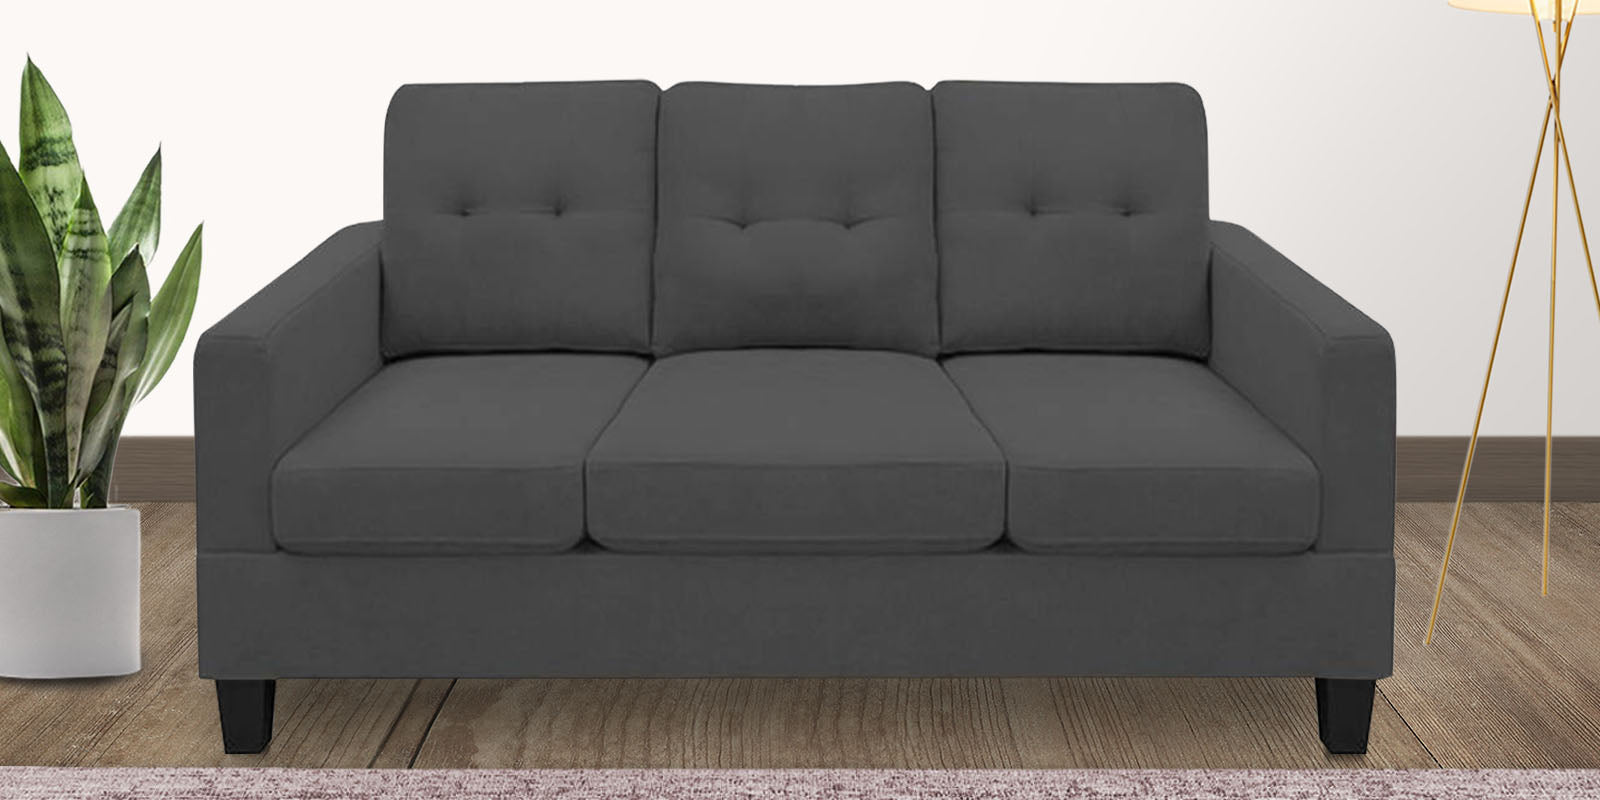 Thomas Fabric 3 Seater Sofa in Charcoal Grey Colour